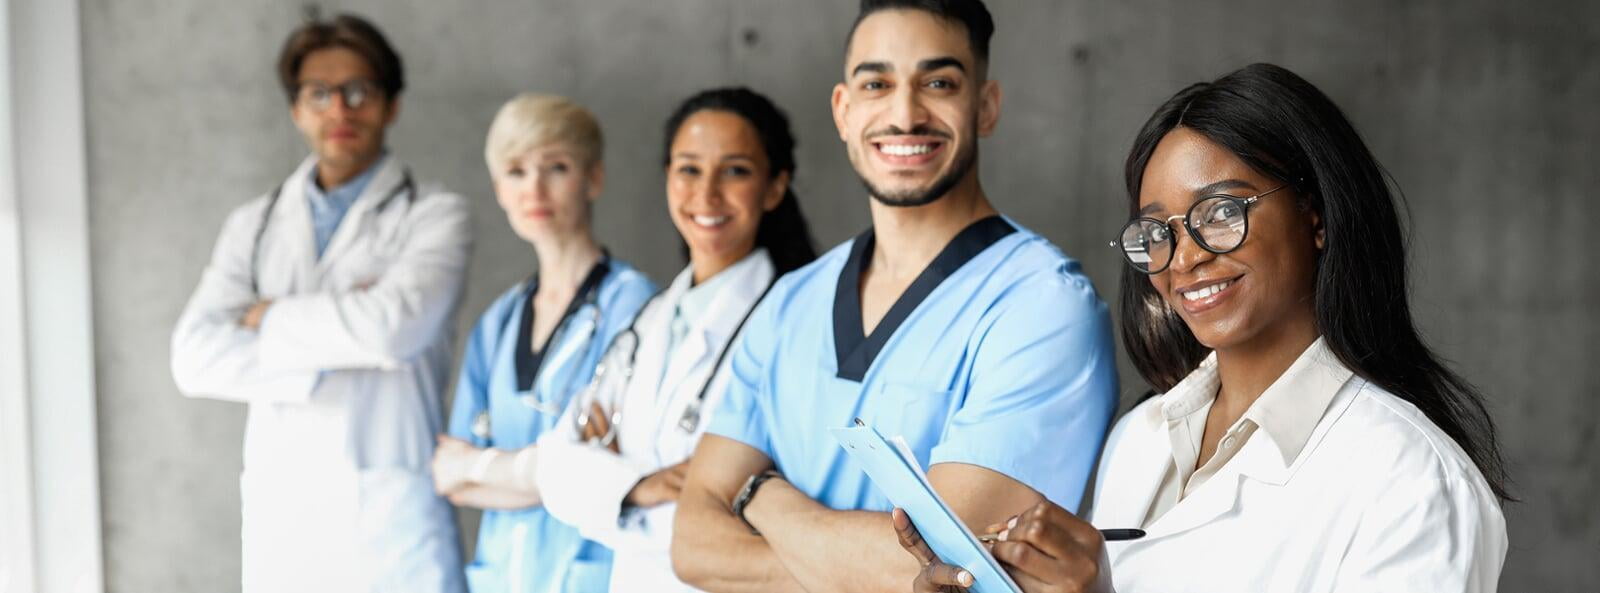 Pros, Cons, and How to Get Started as a Locum Doctor in Ontario